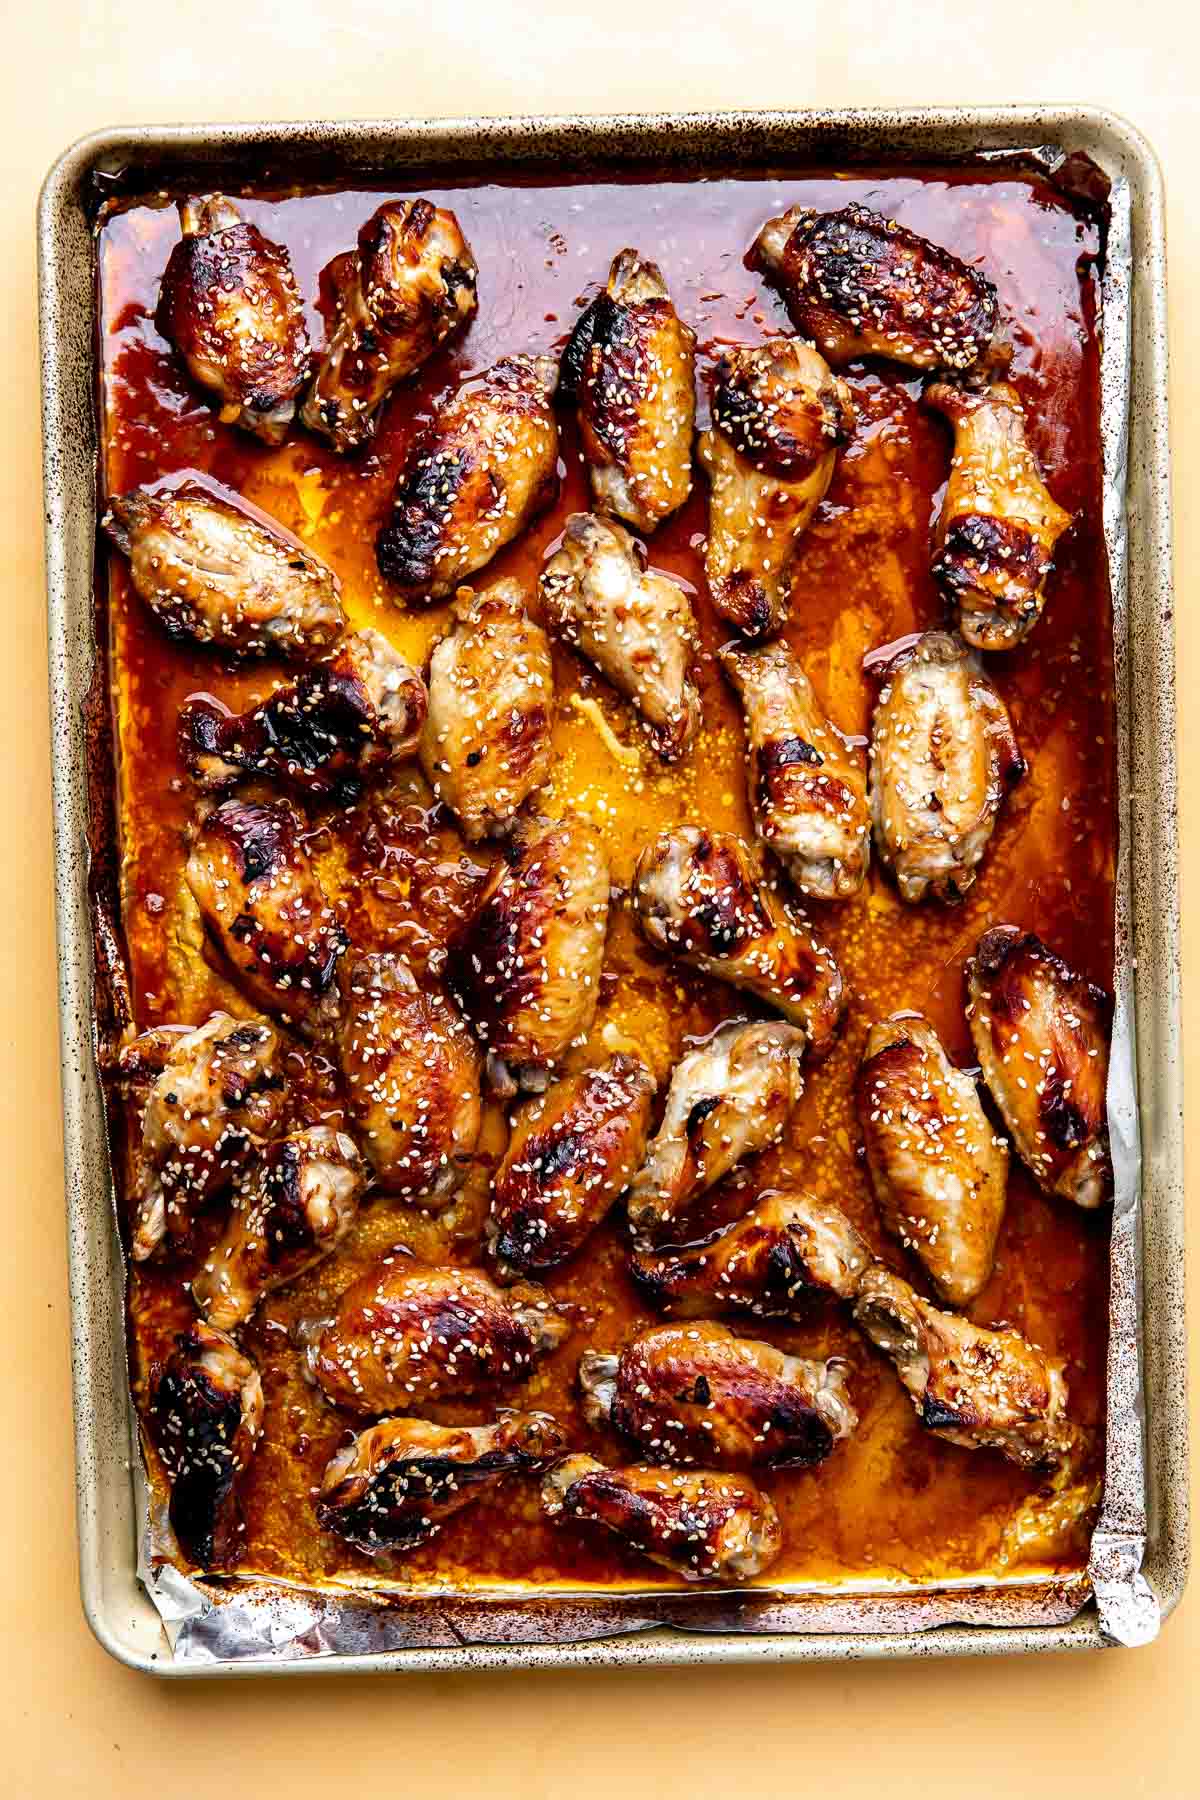 Baked honey sesame chicken wings are spread across an aluminum foil lined baking sheet in a single layer. The baking sheet sits atop a yellow textured surface.